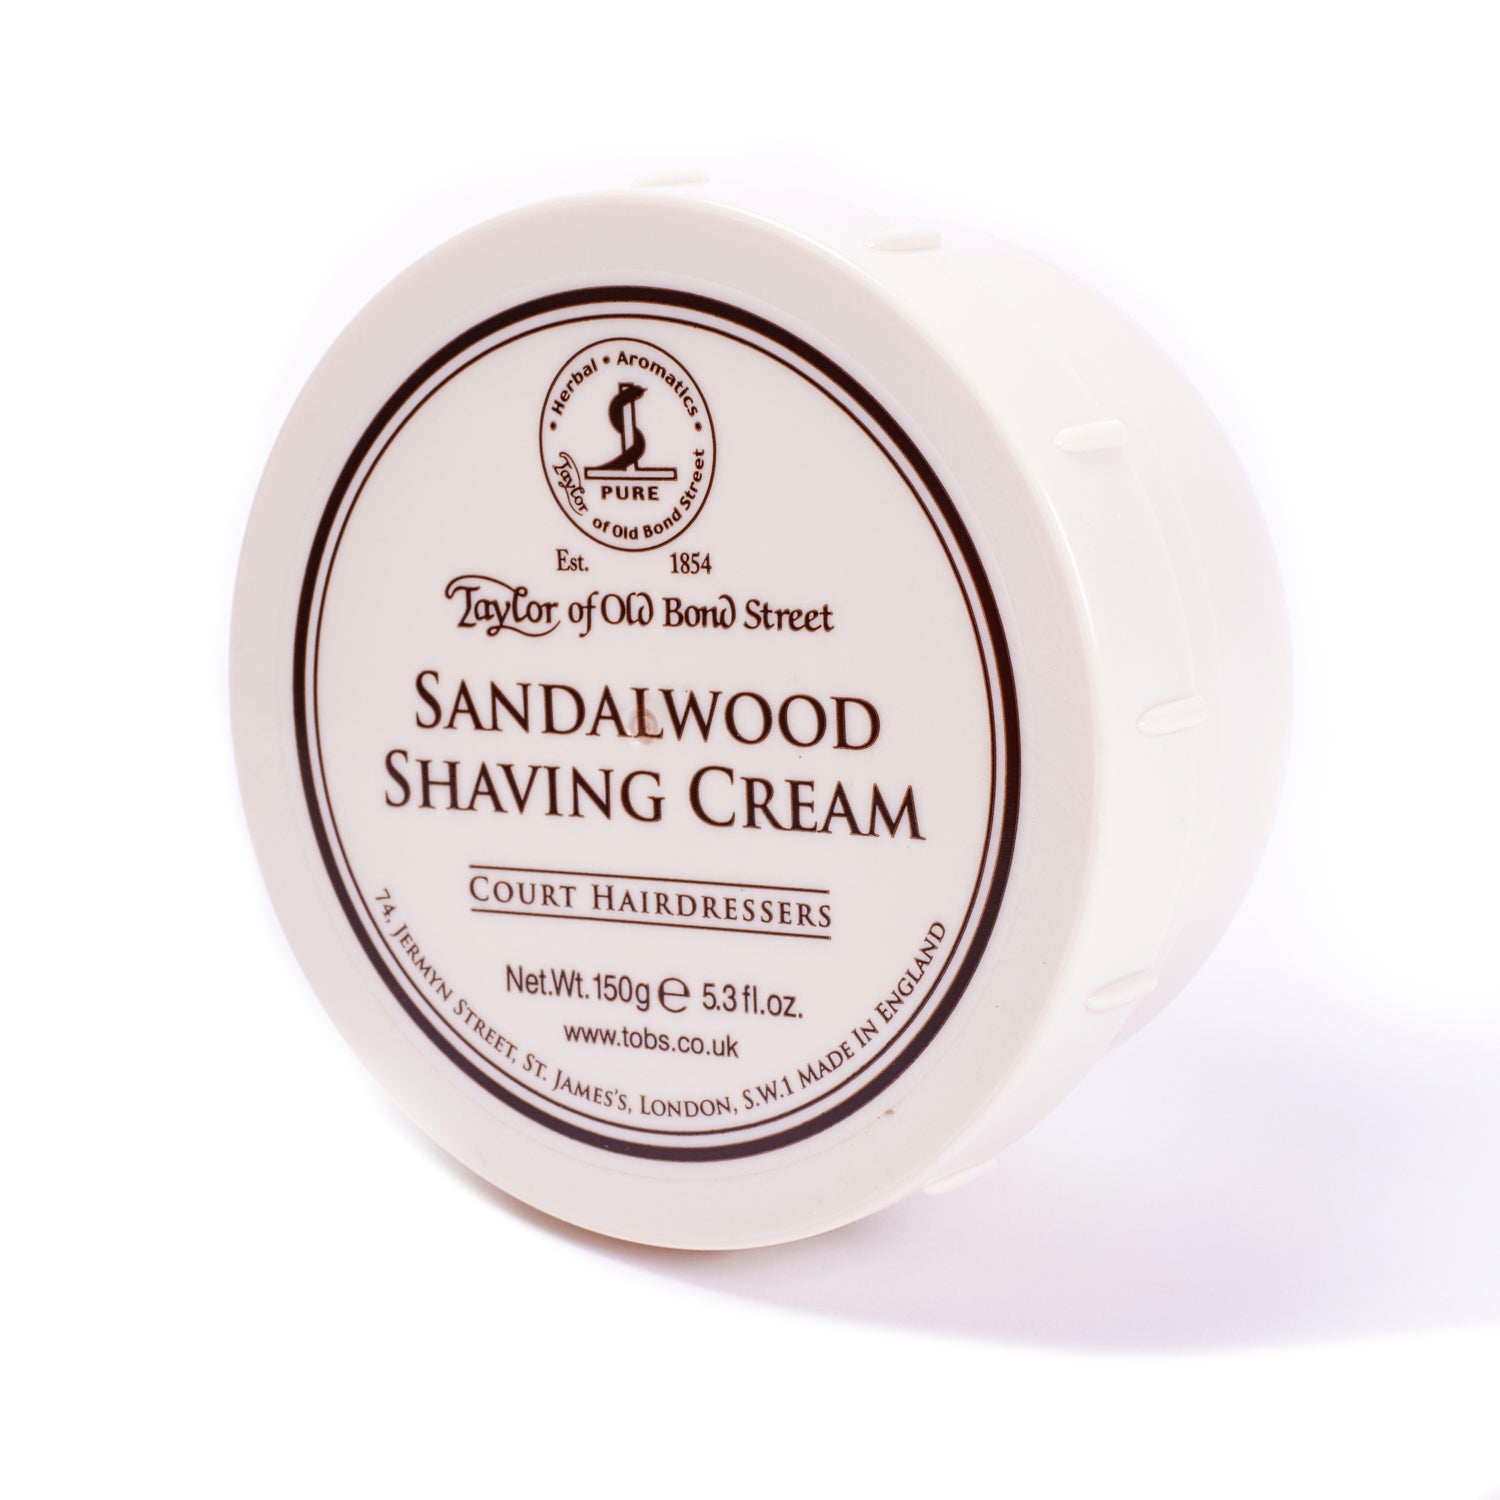 A tin of Sandalwood Shaving Cream Bowl by Taylor of Old Bond Street from KirbyAllison.com on a white background.